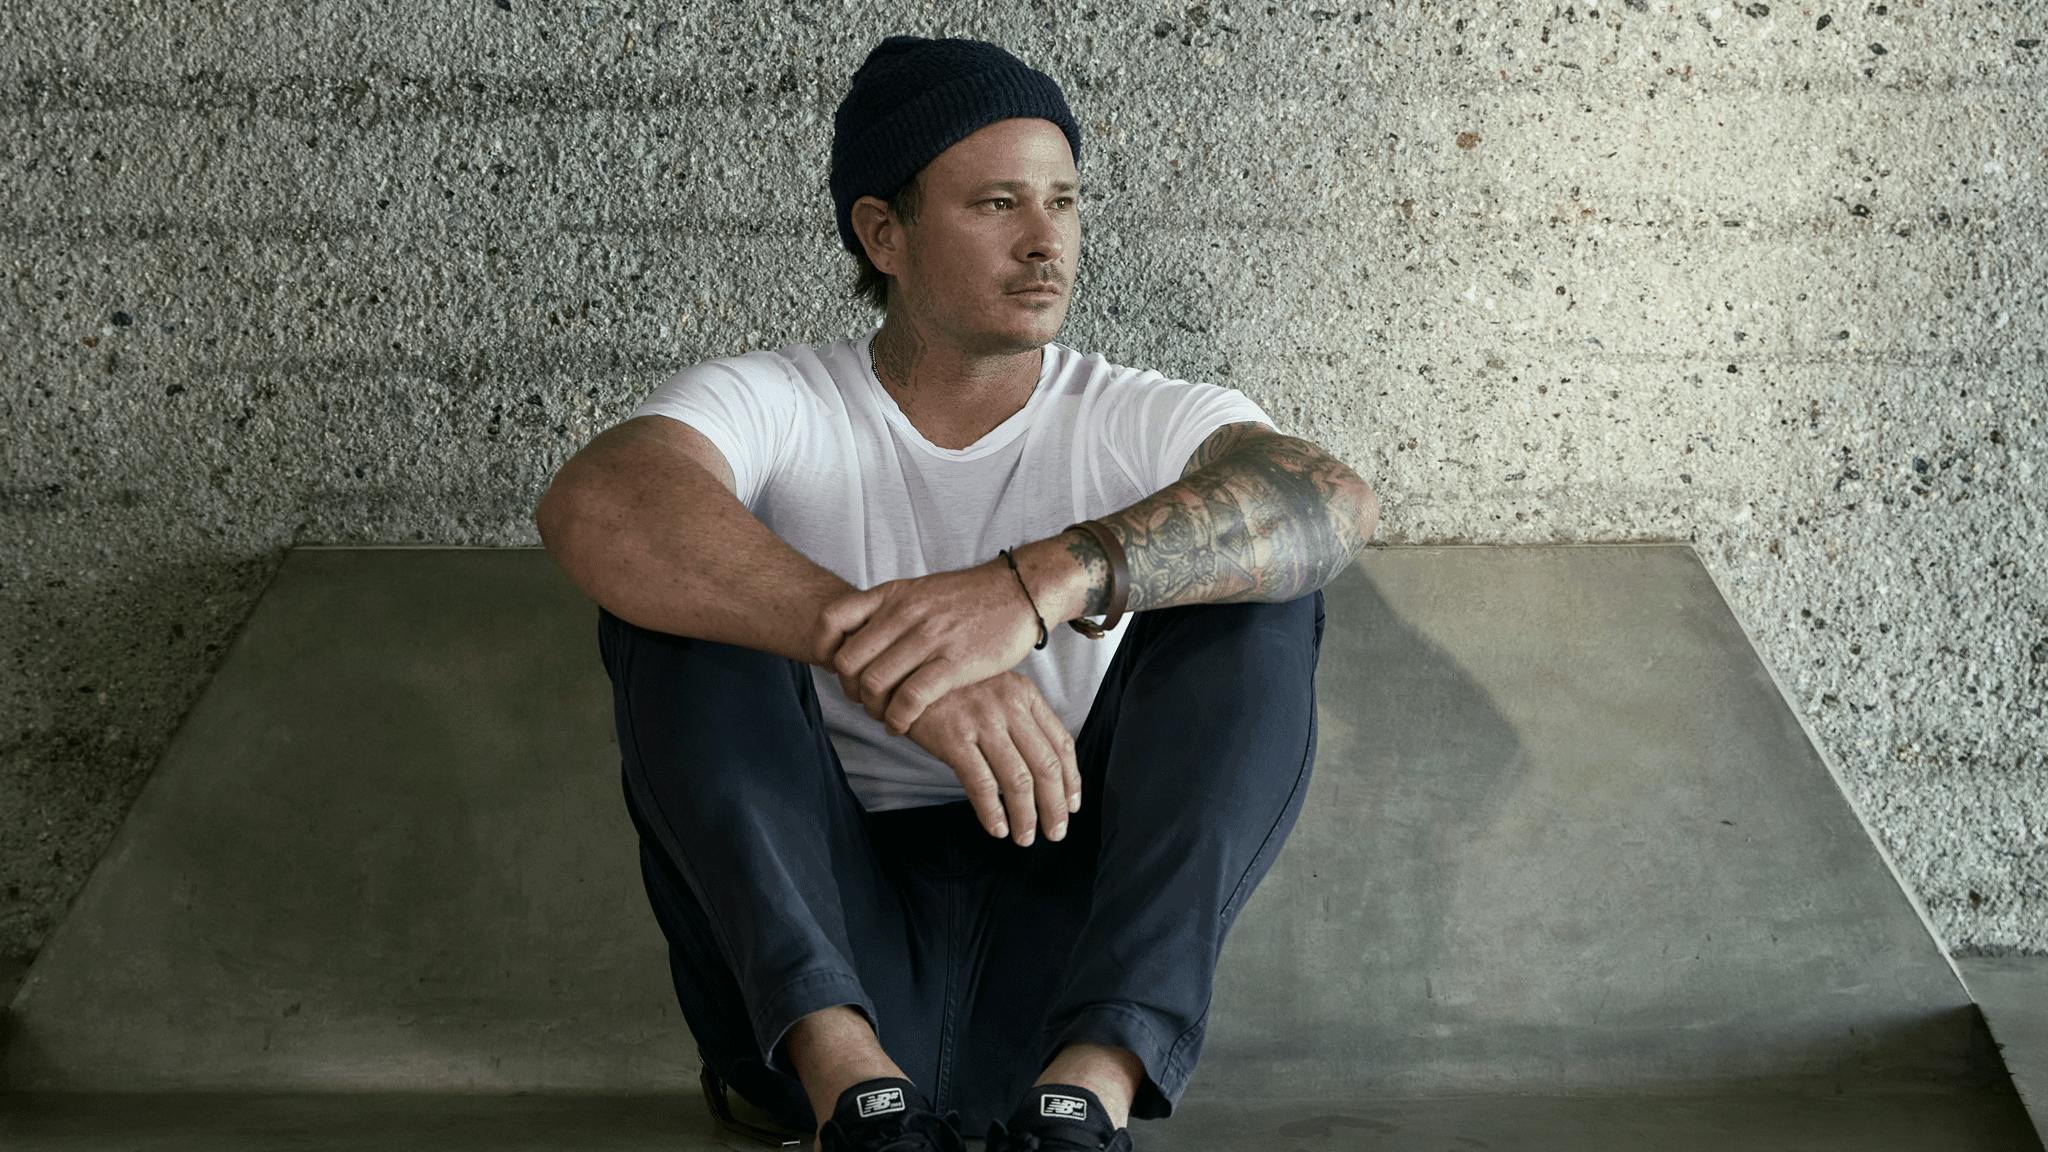 “I am so proud”: blink-182’s Tom DeLonge celebrates being right about aliens